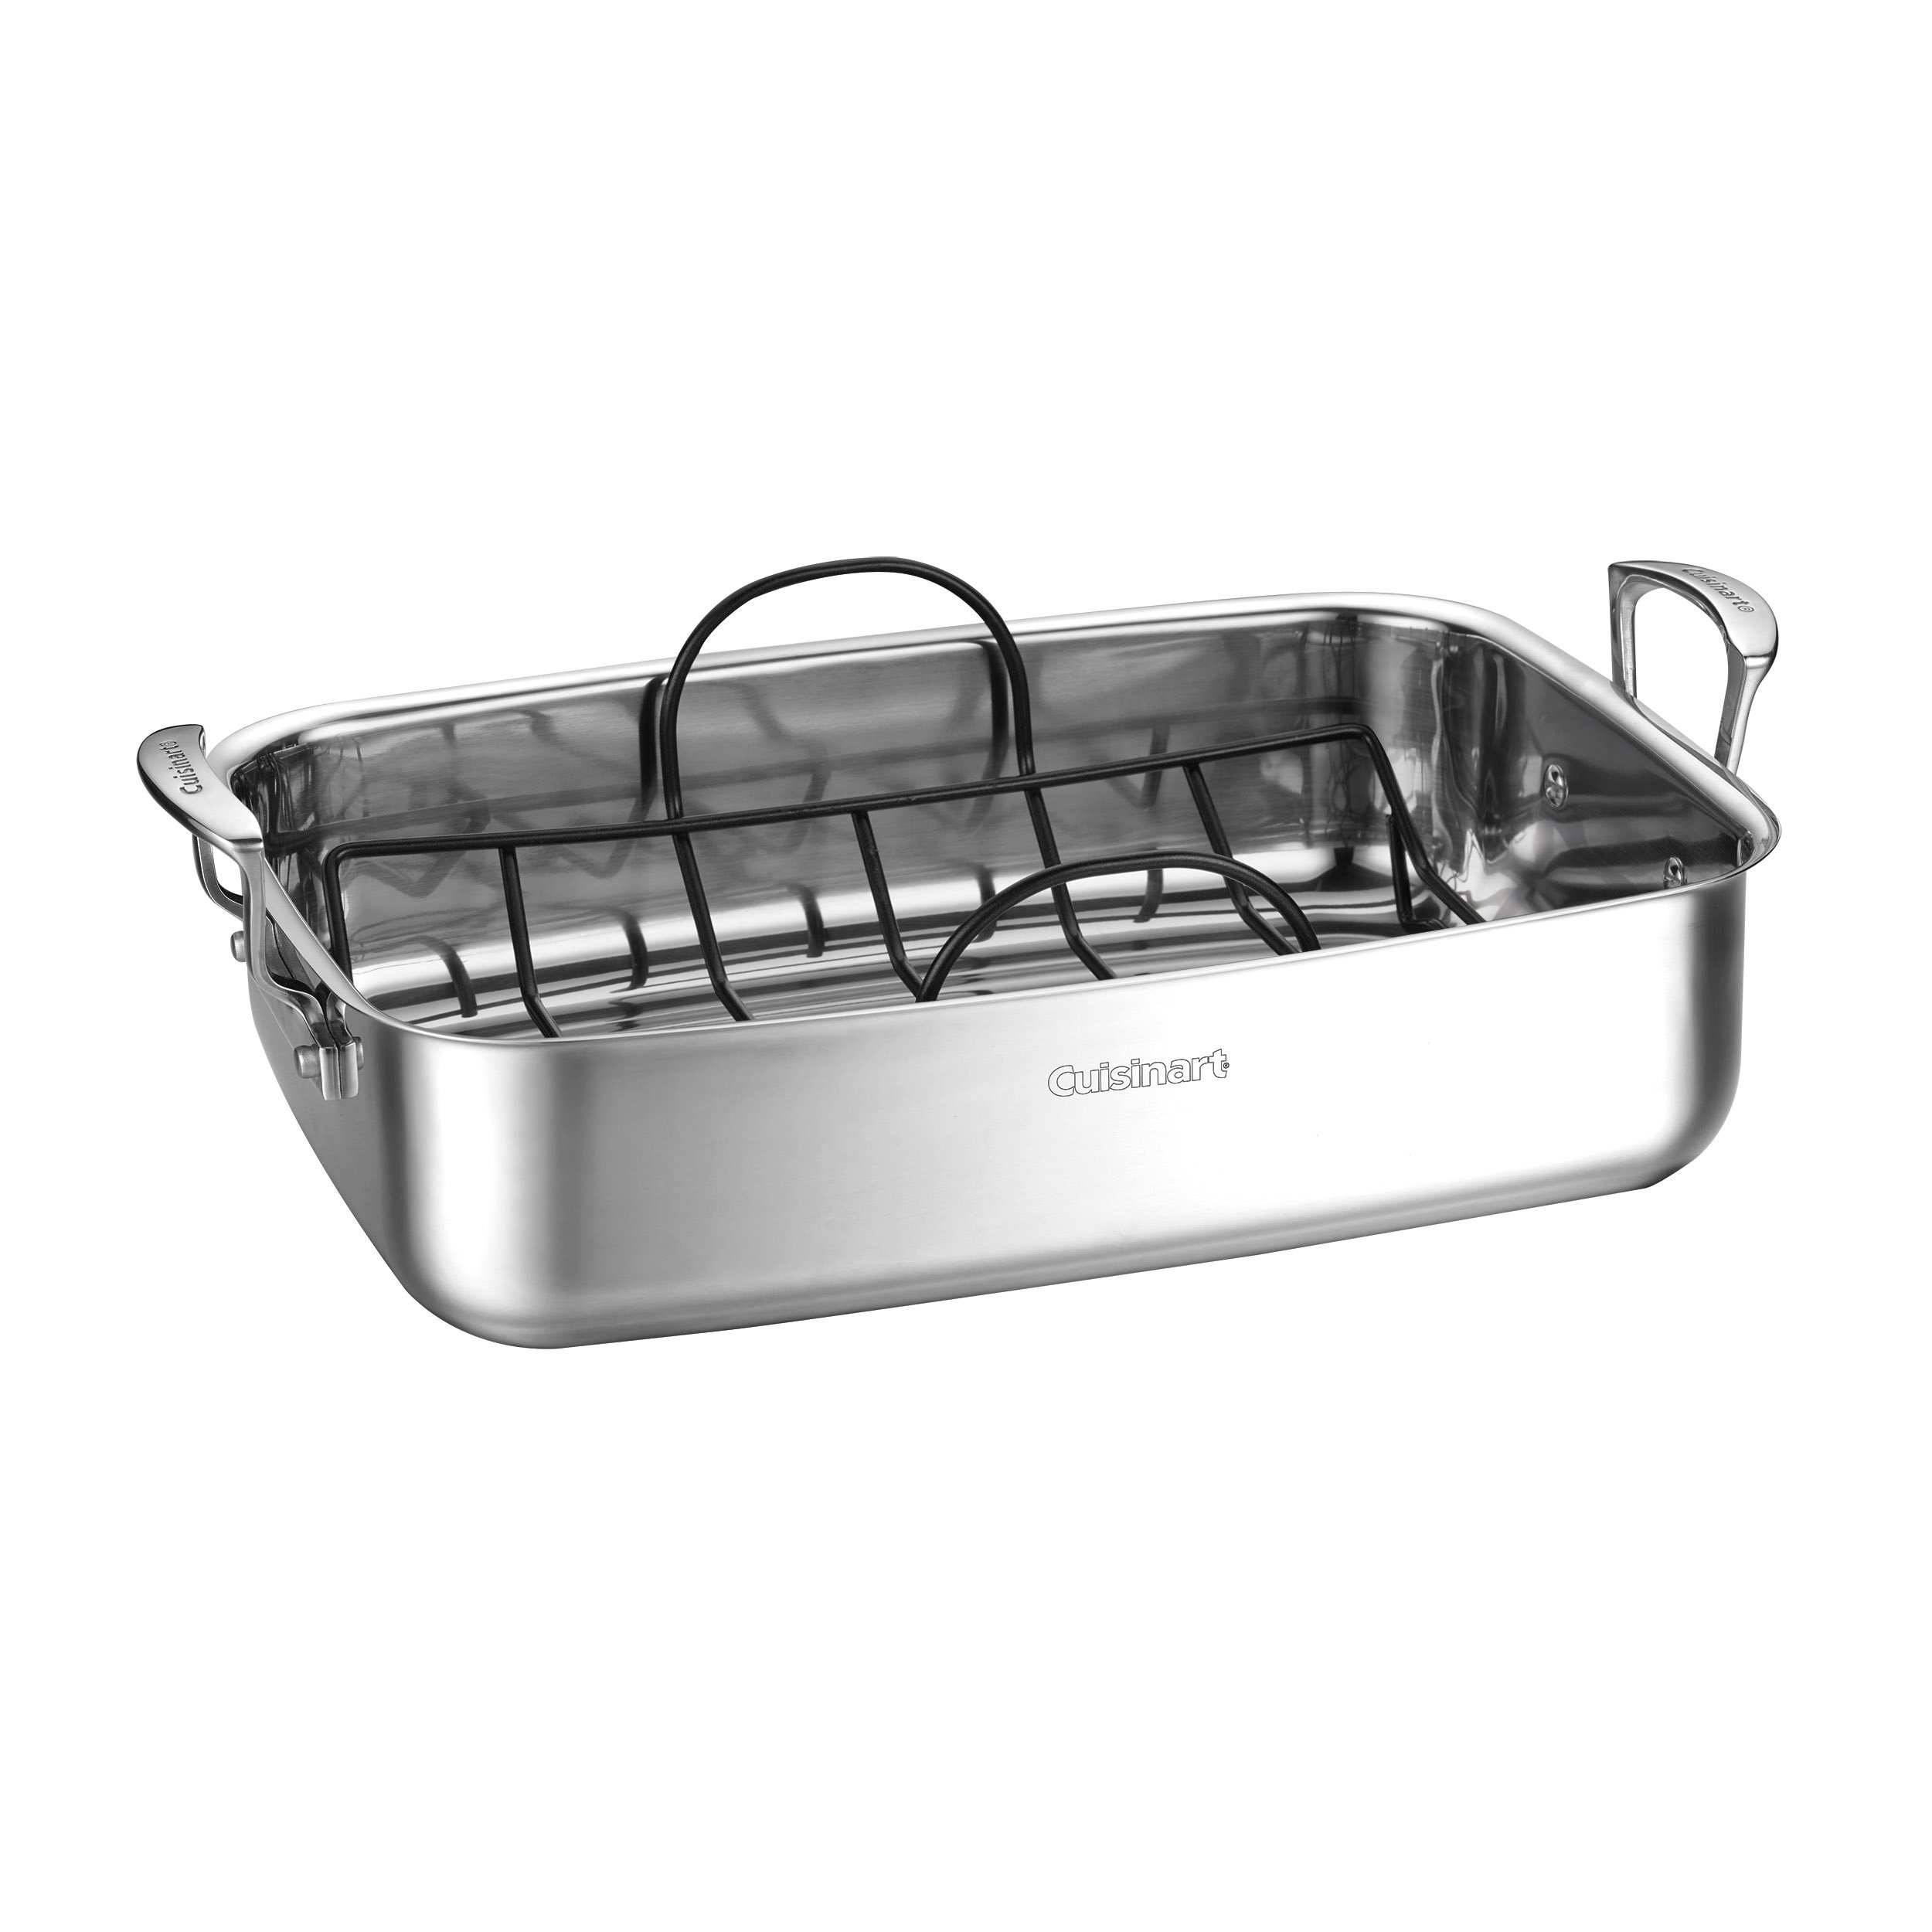 15" Stainless Steel Roaster with Non-Stick Rack